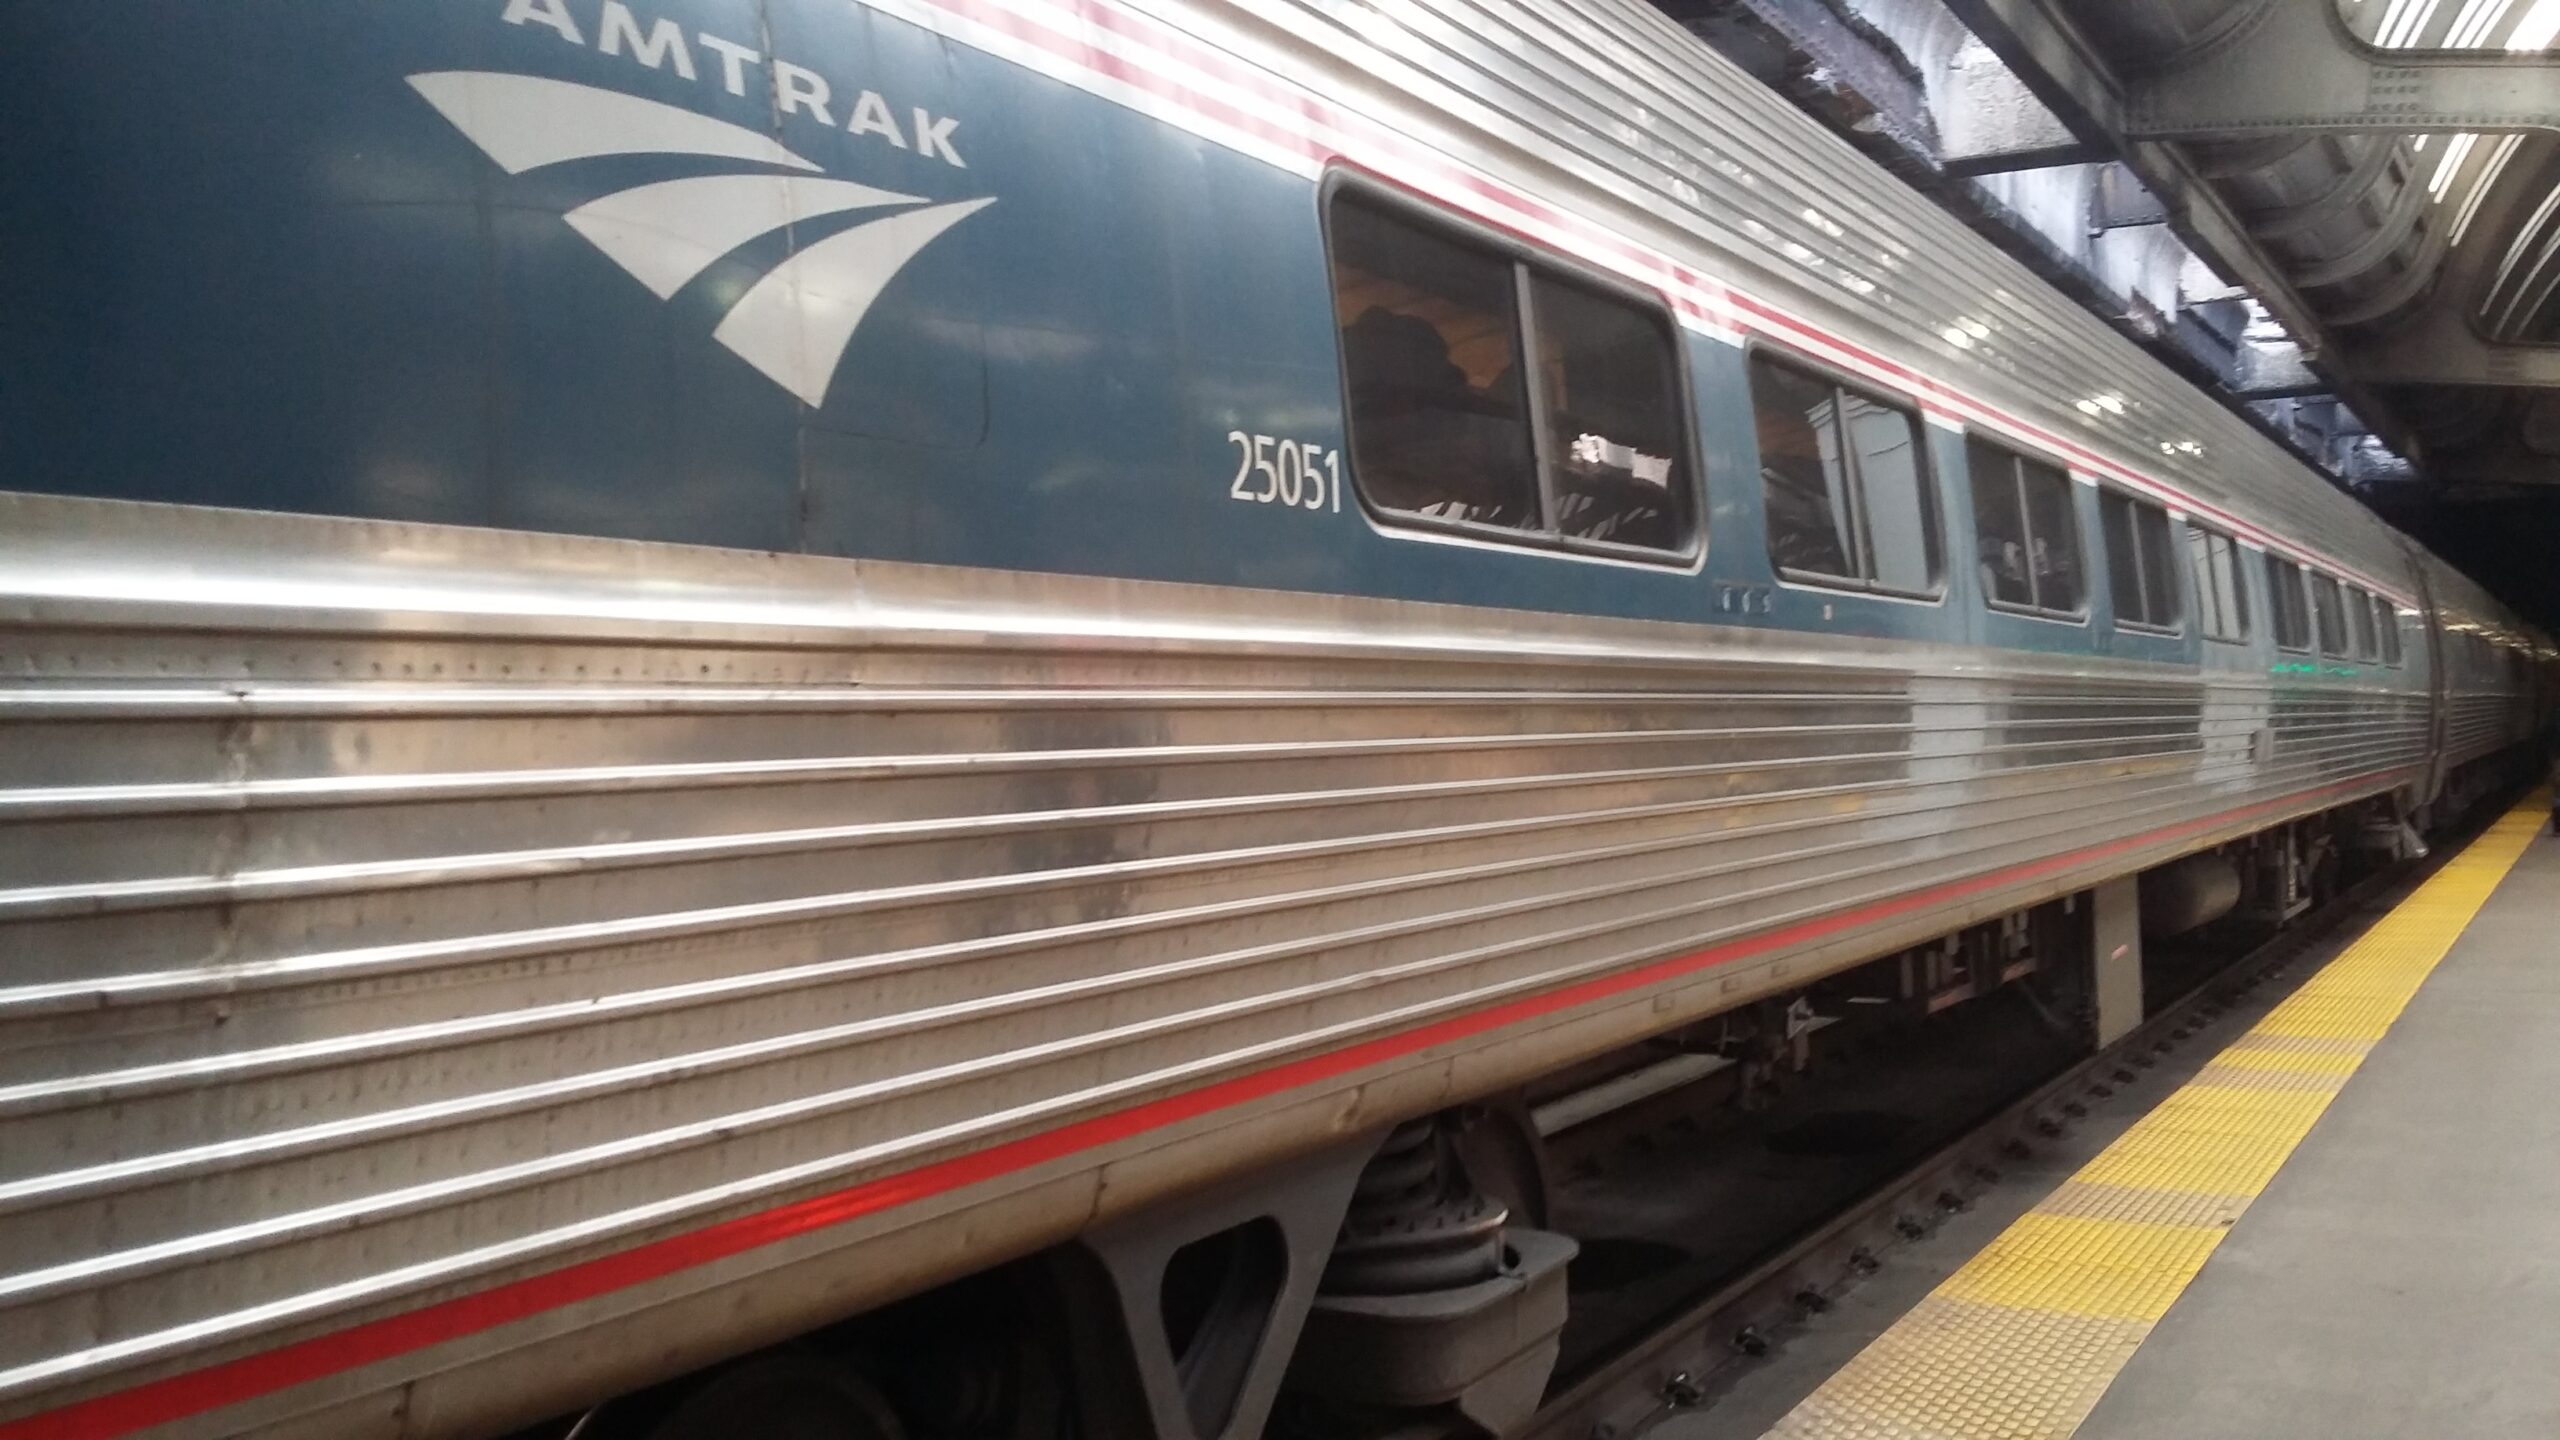 An image of an Amtrak car with the Amtrak logo in the foreground. It extends off into the distance toward the right side of the image. It is a passenger car with a wide blue stripe running along at window height and the rest of the body is polished metal. A thin red stripe also runs along the bottom and right above the blue stripe.